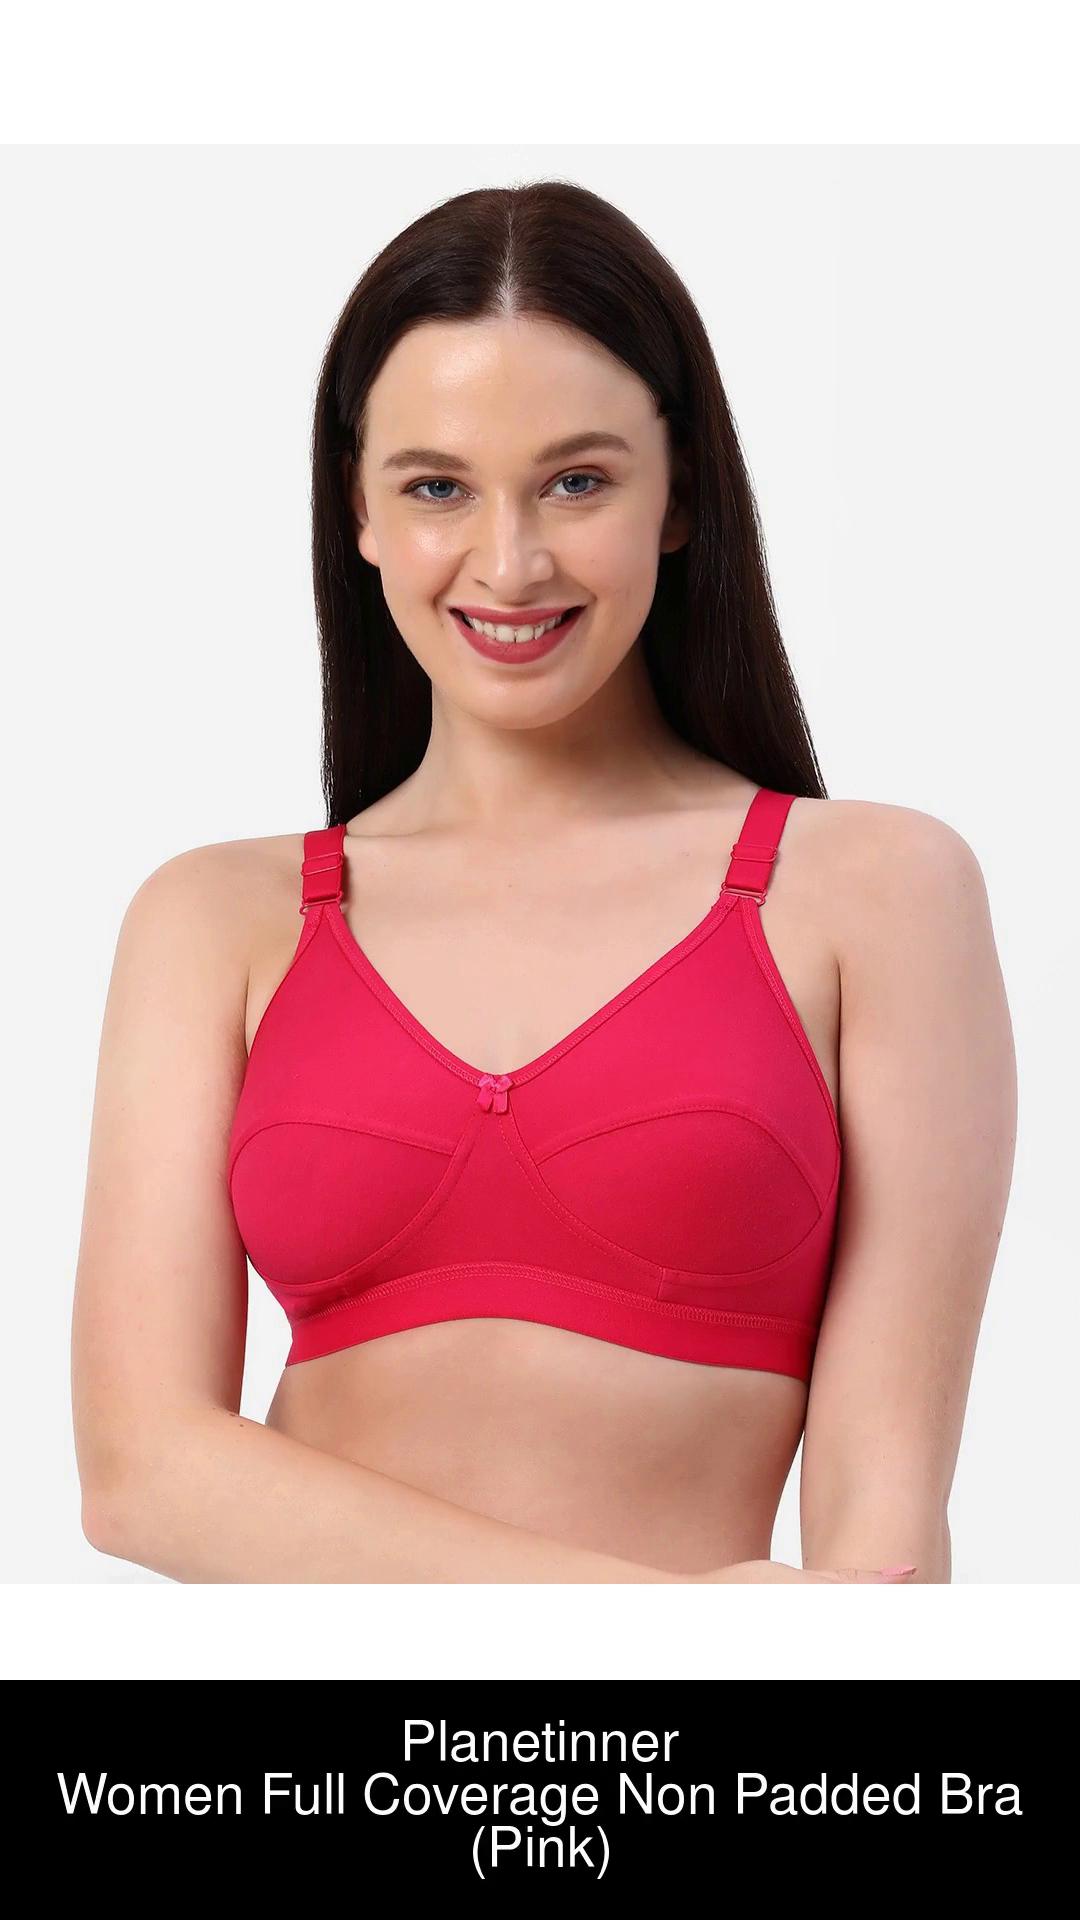 Planetinner Women Full Coverage Non Padded Bra - Buy Planetinner Women Full  Coverage Non Padded Bra Online at Best Prices in India